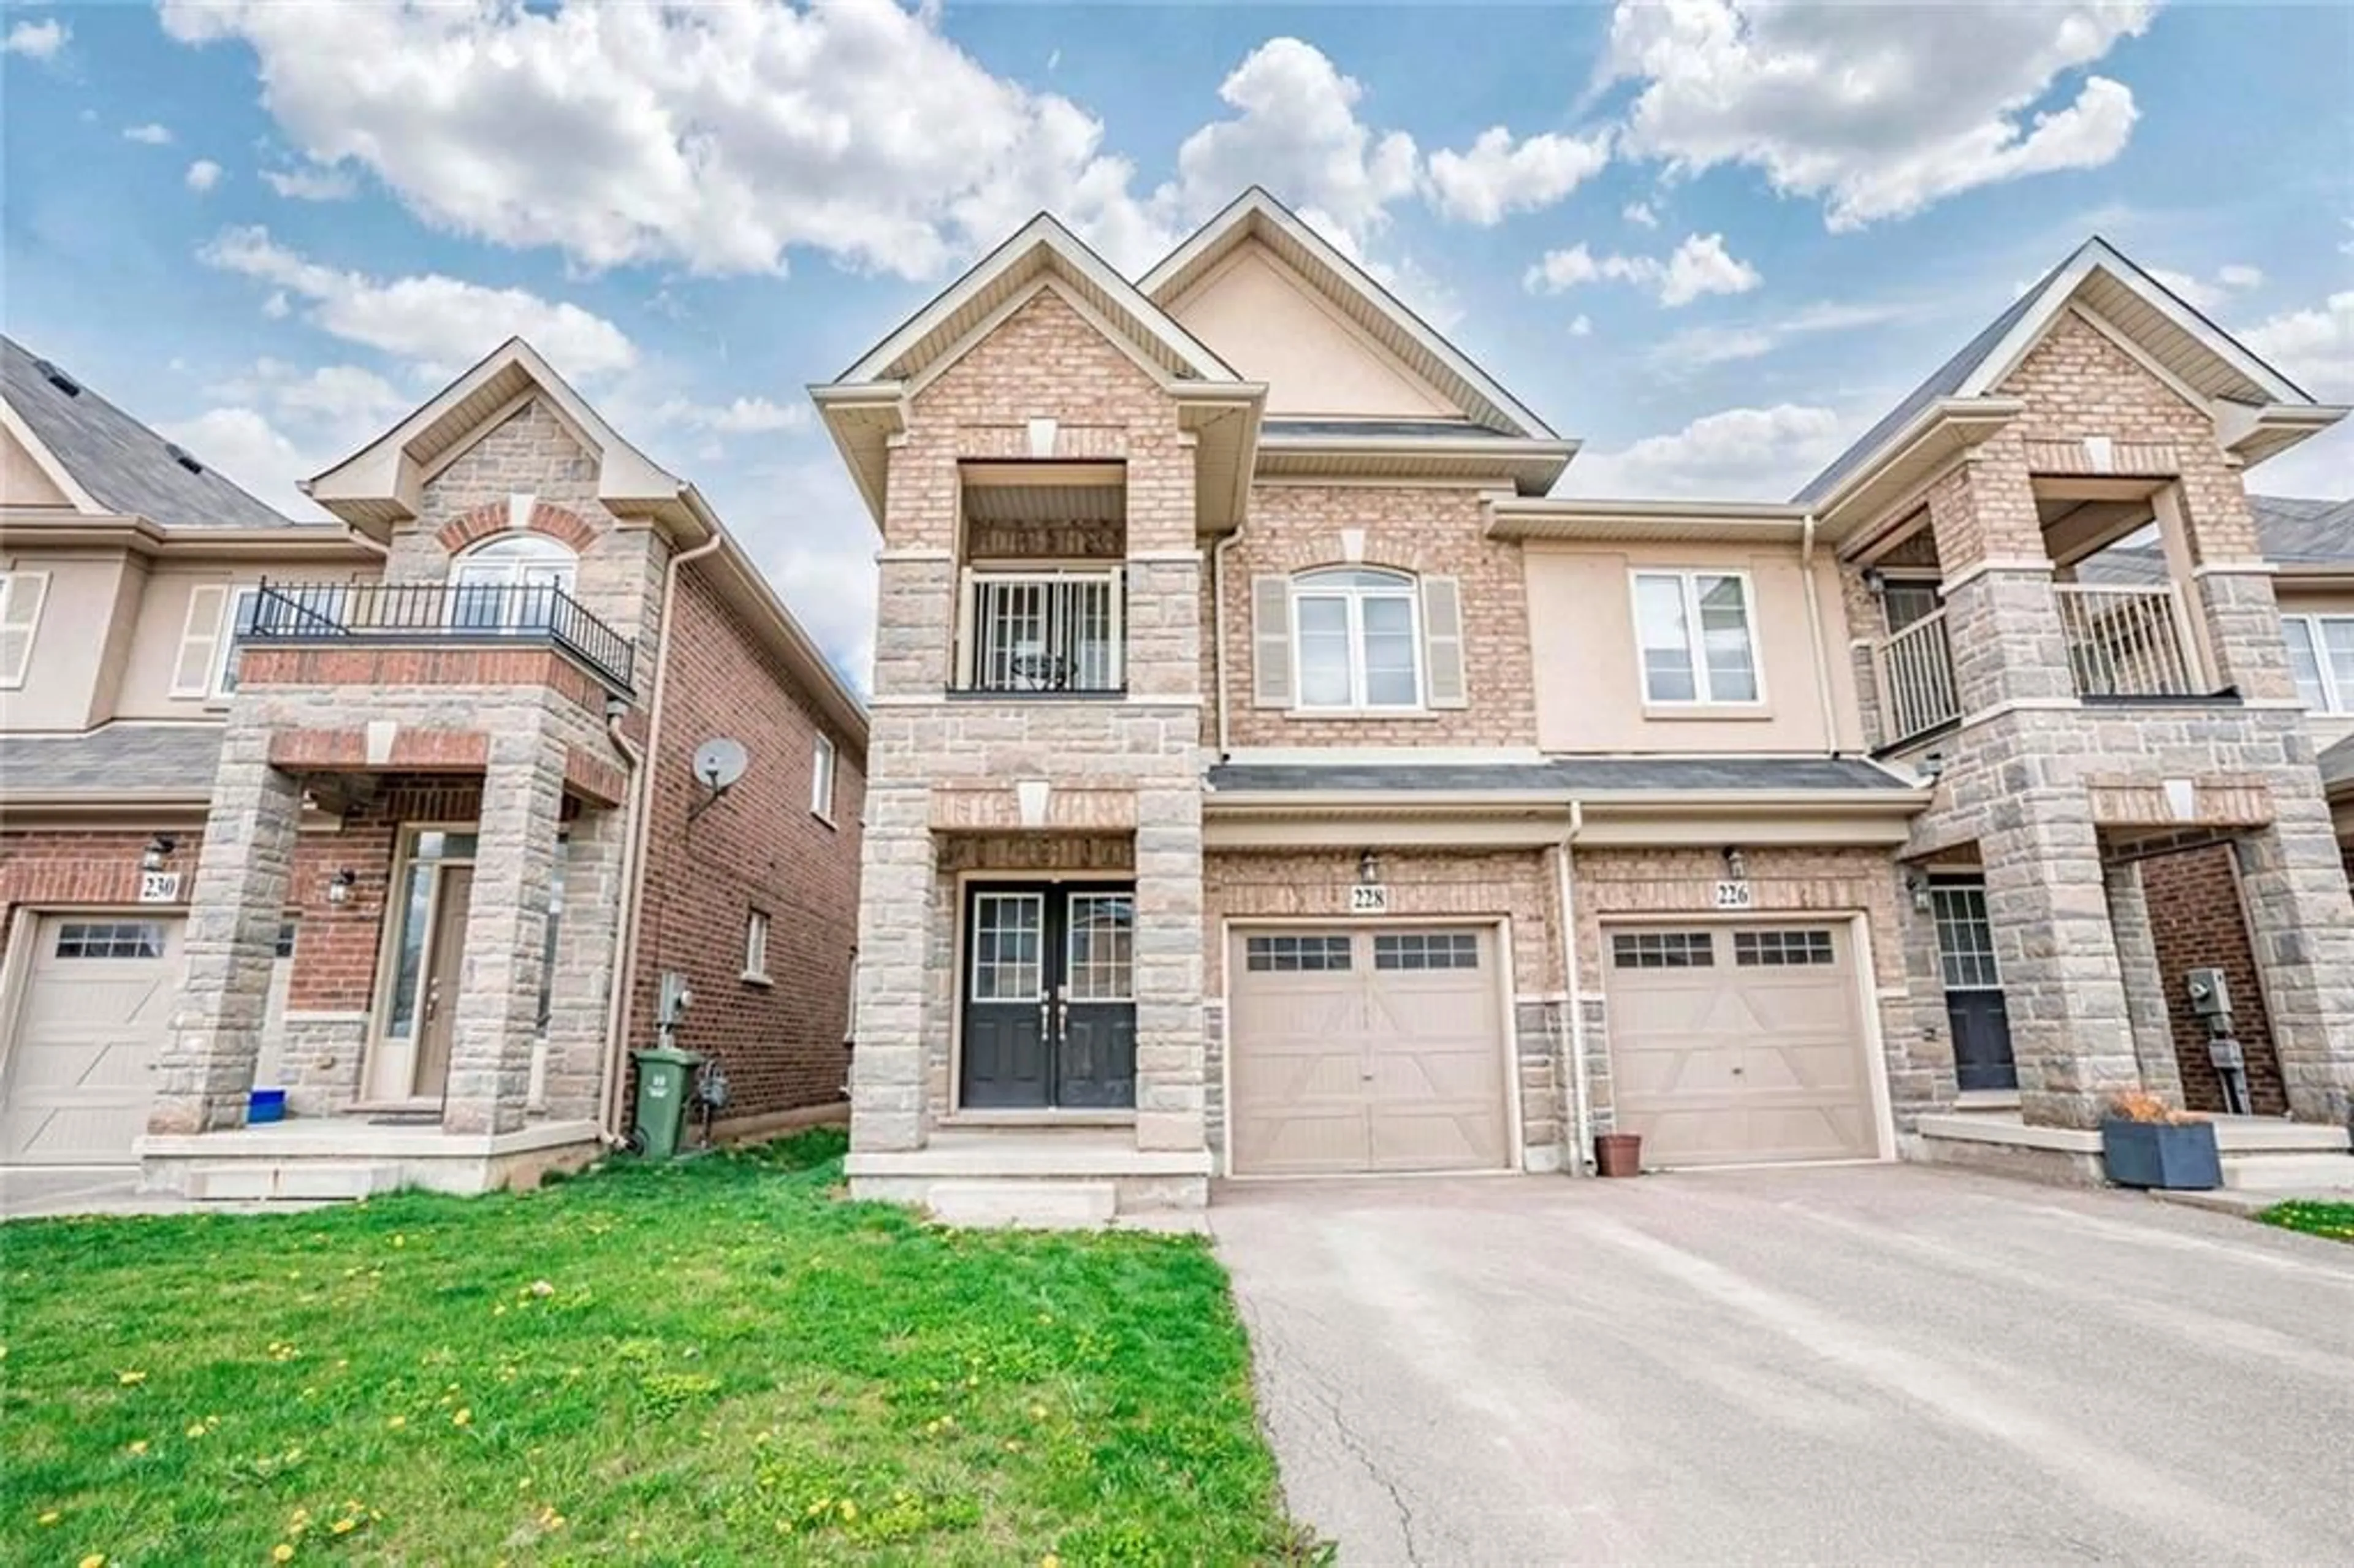 Home with brick exterior material for 228 Lormont Blvd, Stoney Creek Ontario L8J 0J9